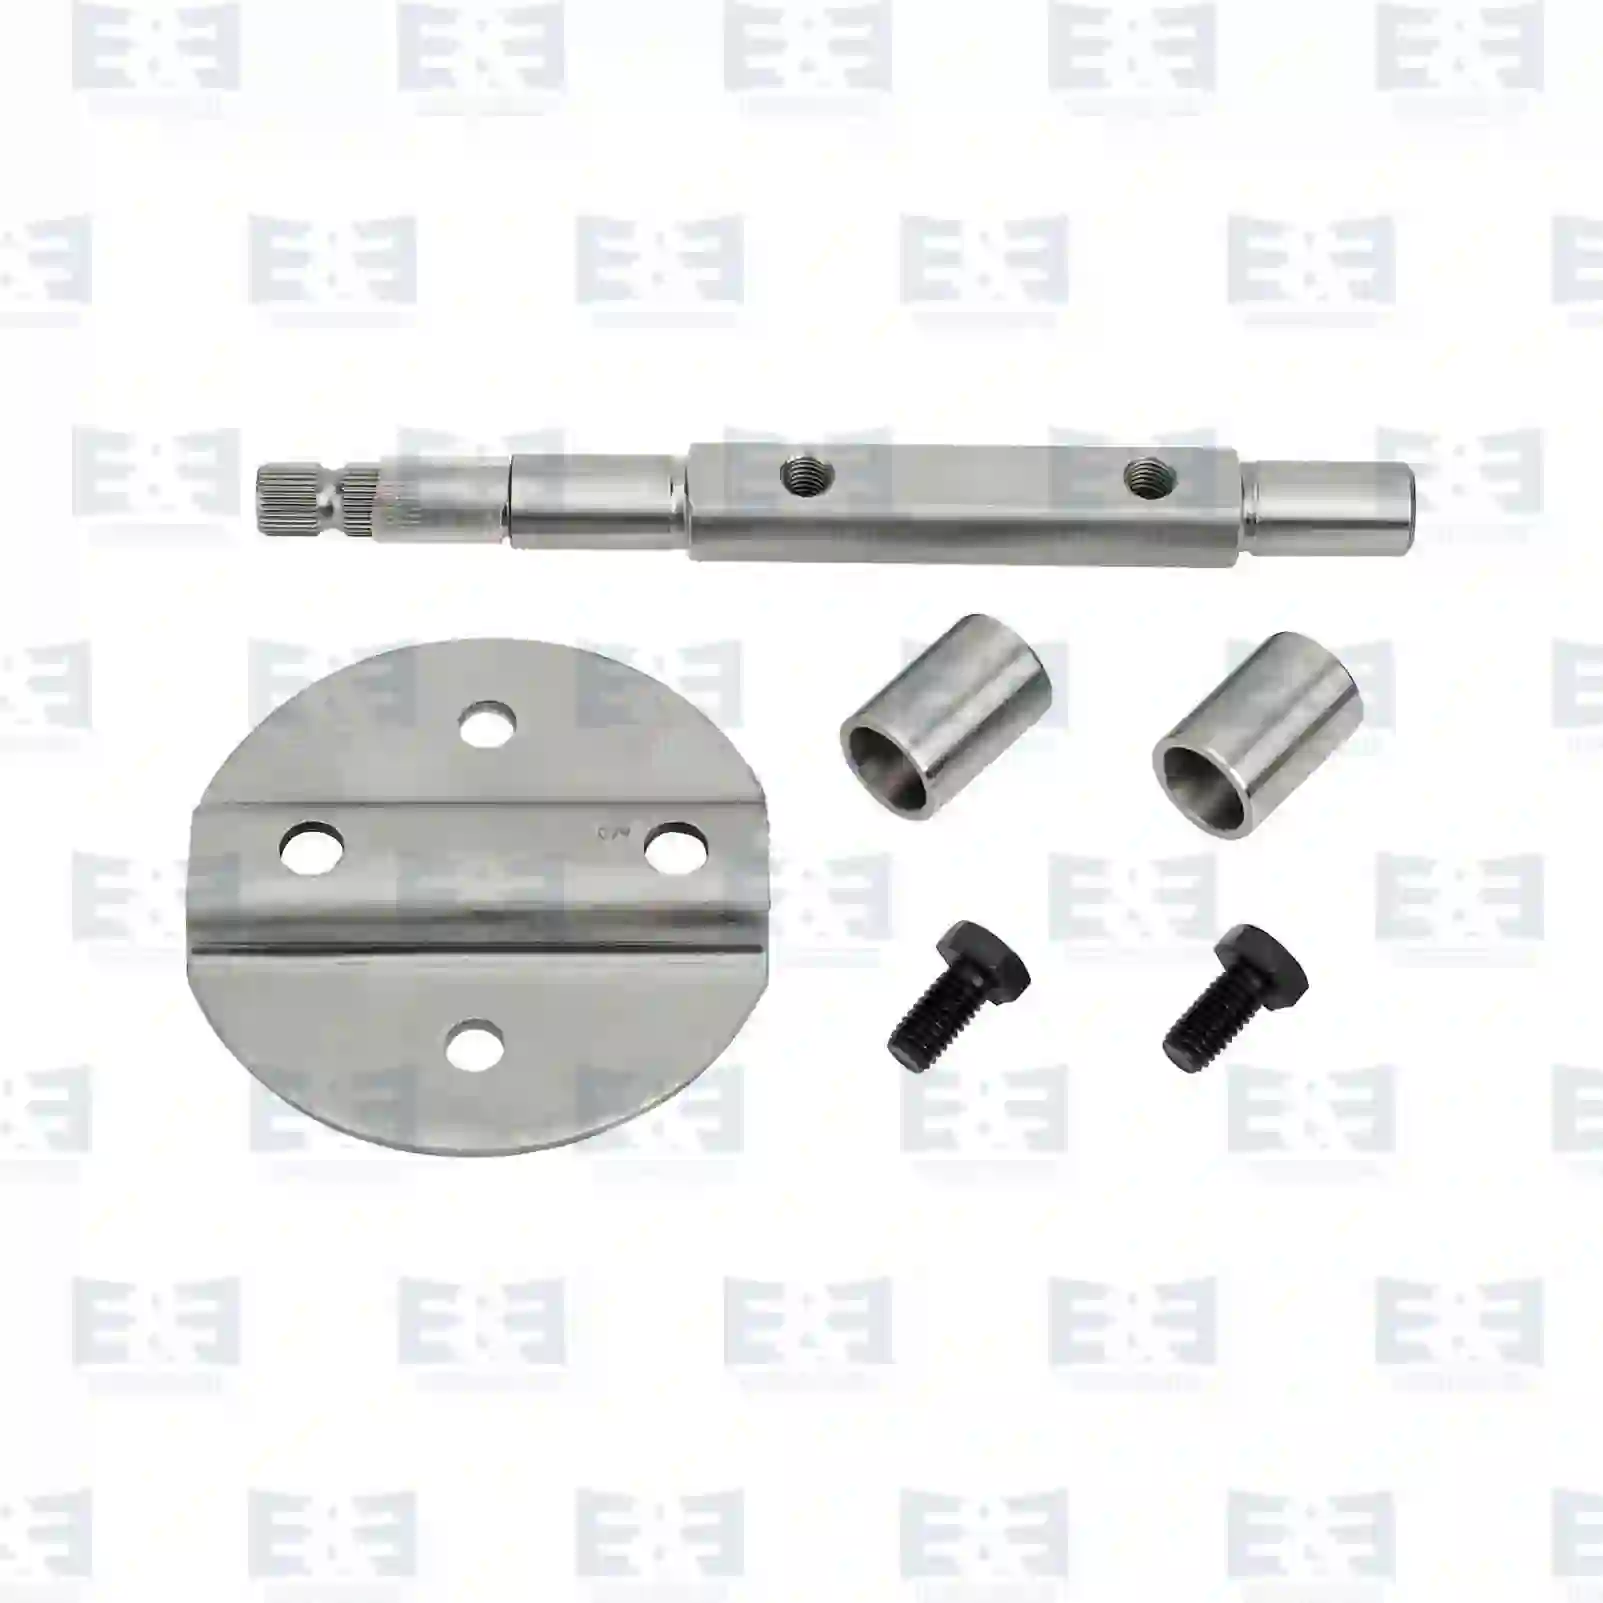 Throttle kit, stainless steel, 2E2209452, 4221401663, 4221402663, 4411400063, 4411400363 ||  2E2209452 E&E Truck Spare Parts | Truck Spare Parts, Auotomotive Spare Parts Throttle kit, stainless steel, 2E2209452, 4221401663, 4221402663, 4411400063, 4411400363 ||  2E2209452 E&E Truck Spare Parts | Truck Spare Parts, Auotomotive Spare Parts